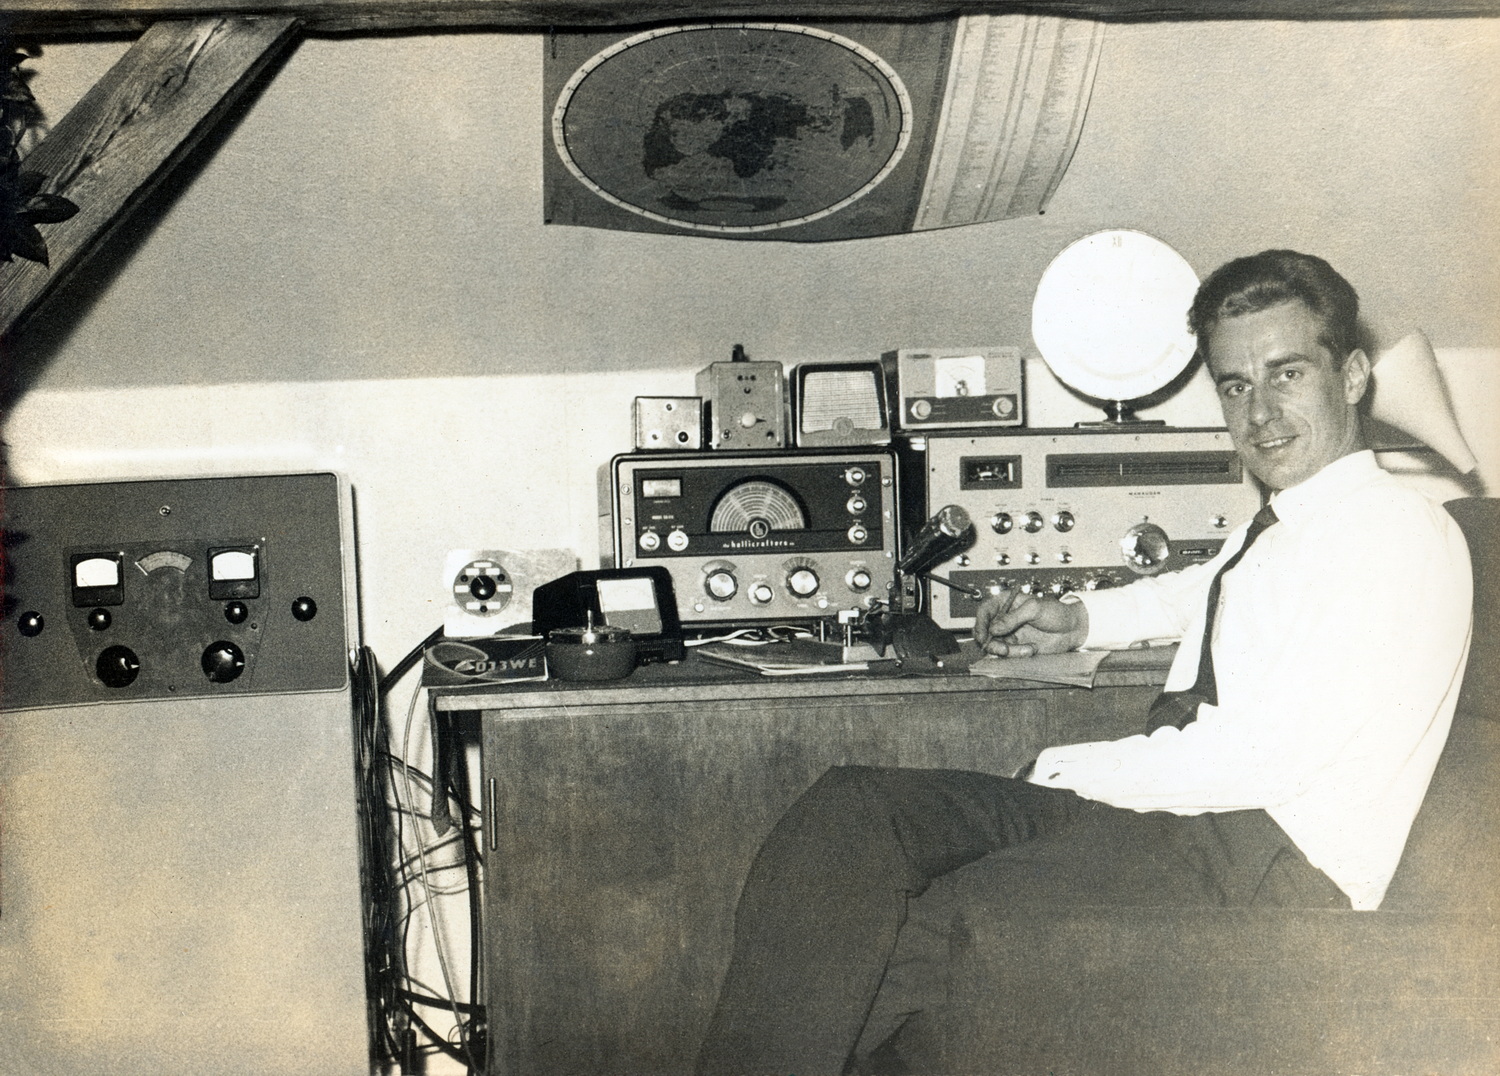 DJ3WE (Rudy), 25th June 1966 made a contact on 5 Bands 80m through to 10m SSB.